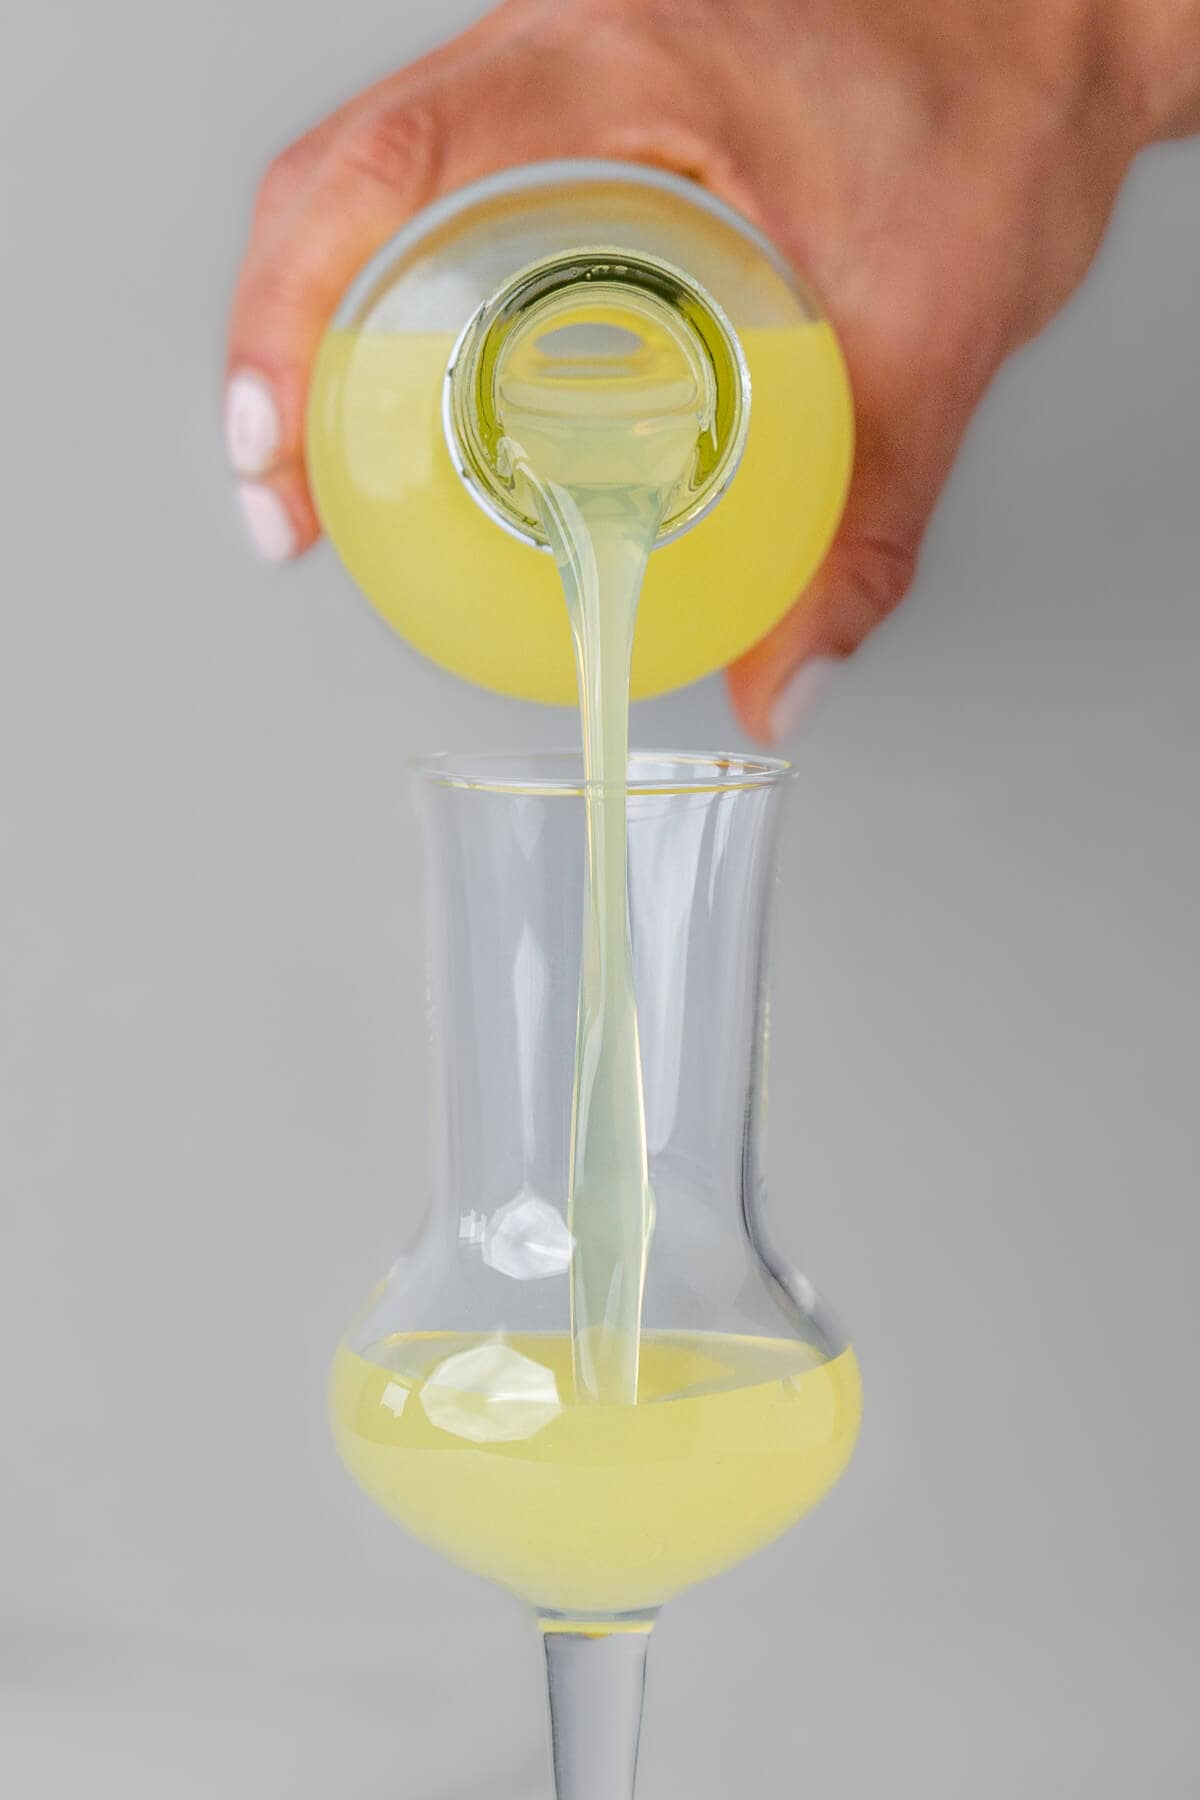 Limoncello being poured into a shot glass